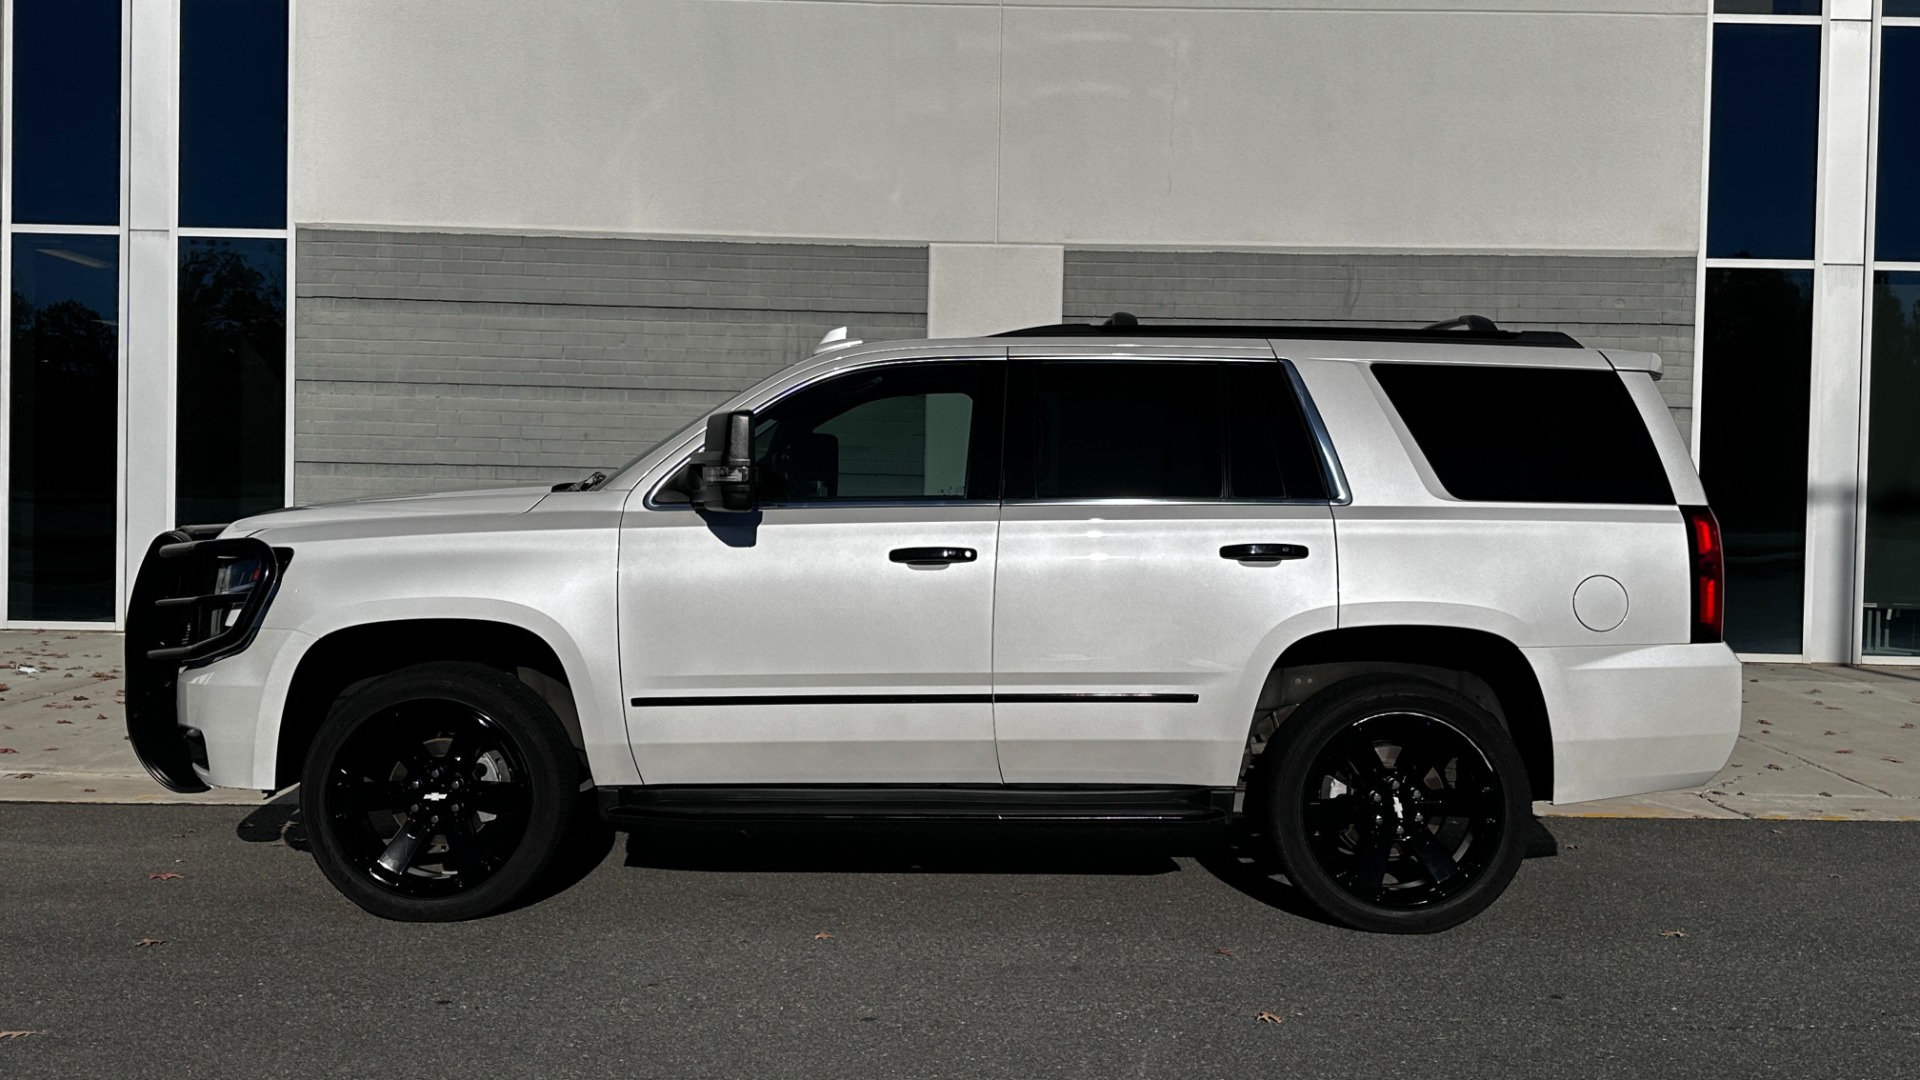 Used 2017 Chevrolet Tahoe PREMIER / LEATHER / DVD / 3RD ROW / NAVIGATION for sale $34,595 at Formula Imports in Charlotte NC 28227 4